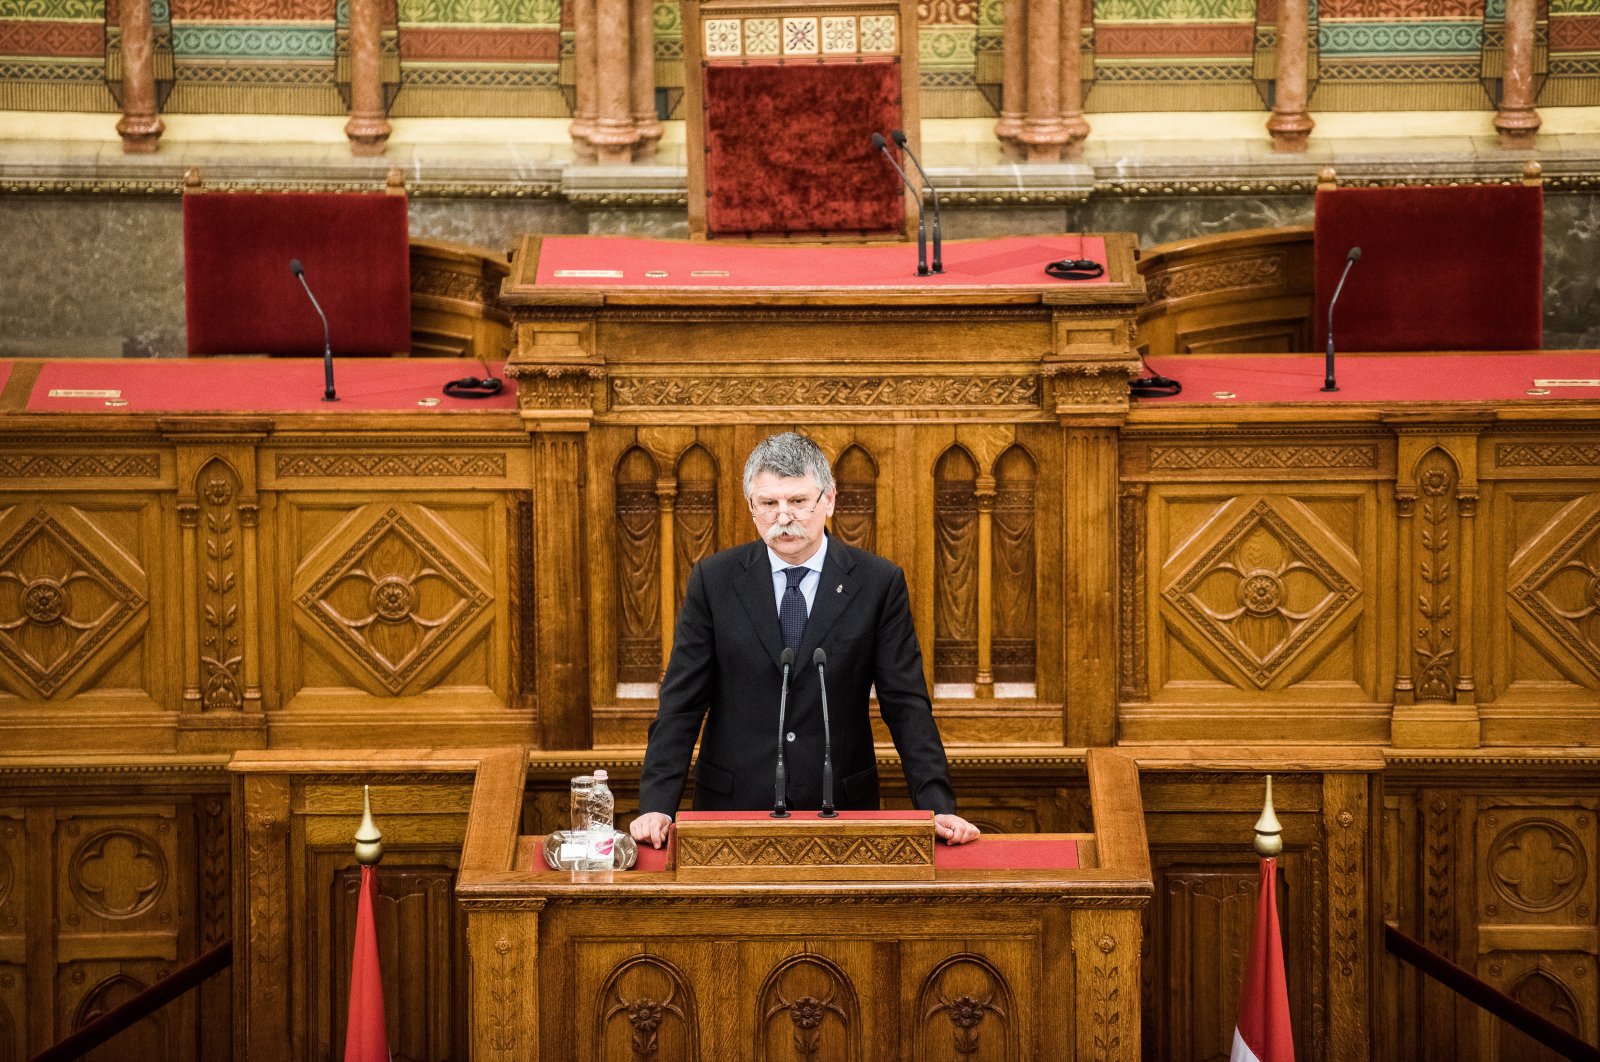 Hungary&#039;s parliament speaker, Laszlo Kover, speaks at the national parliament in Budapest, Hungary, April 25, 2016. (Getty Images)